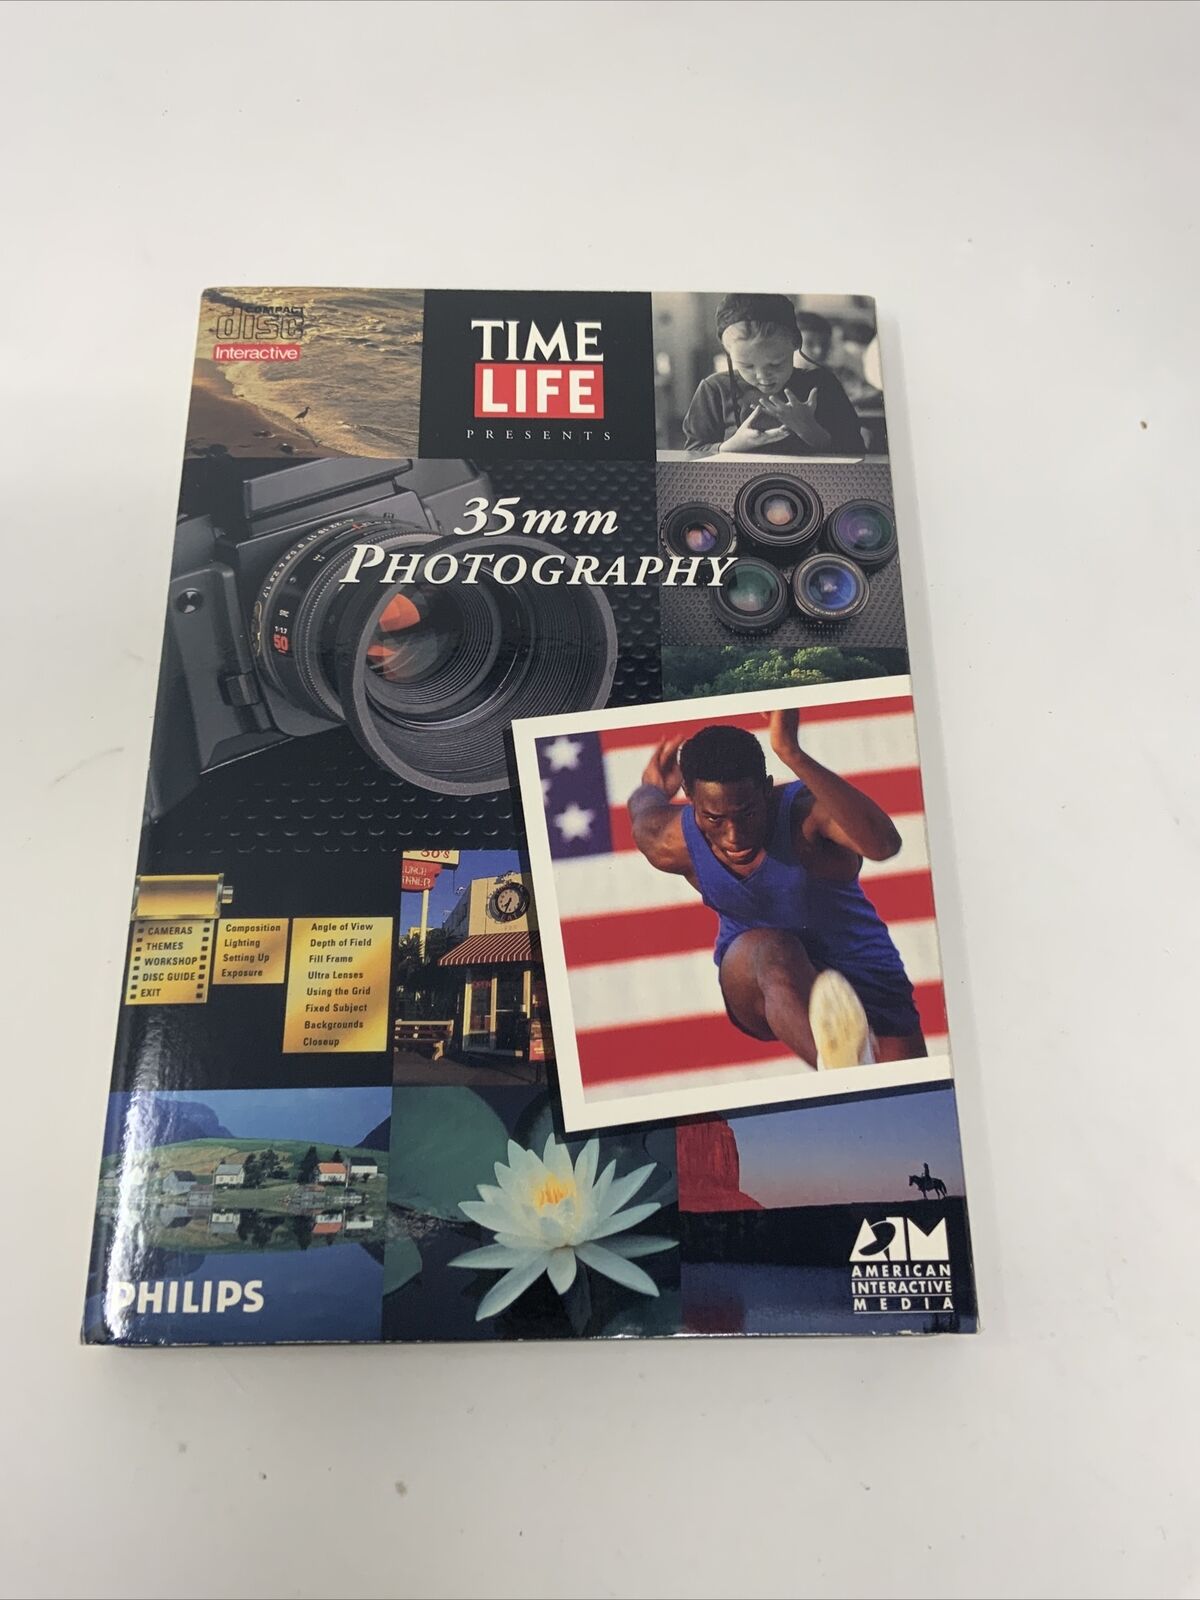 Time-Life Photography (Philips CD-i, 1990) with Long Box